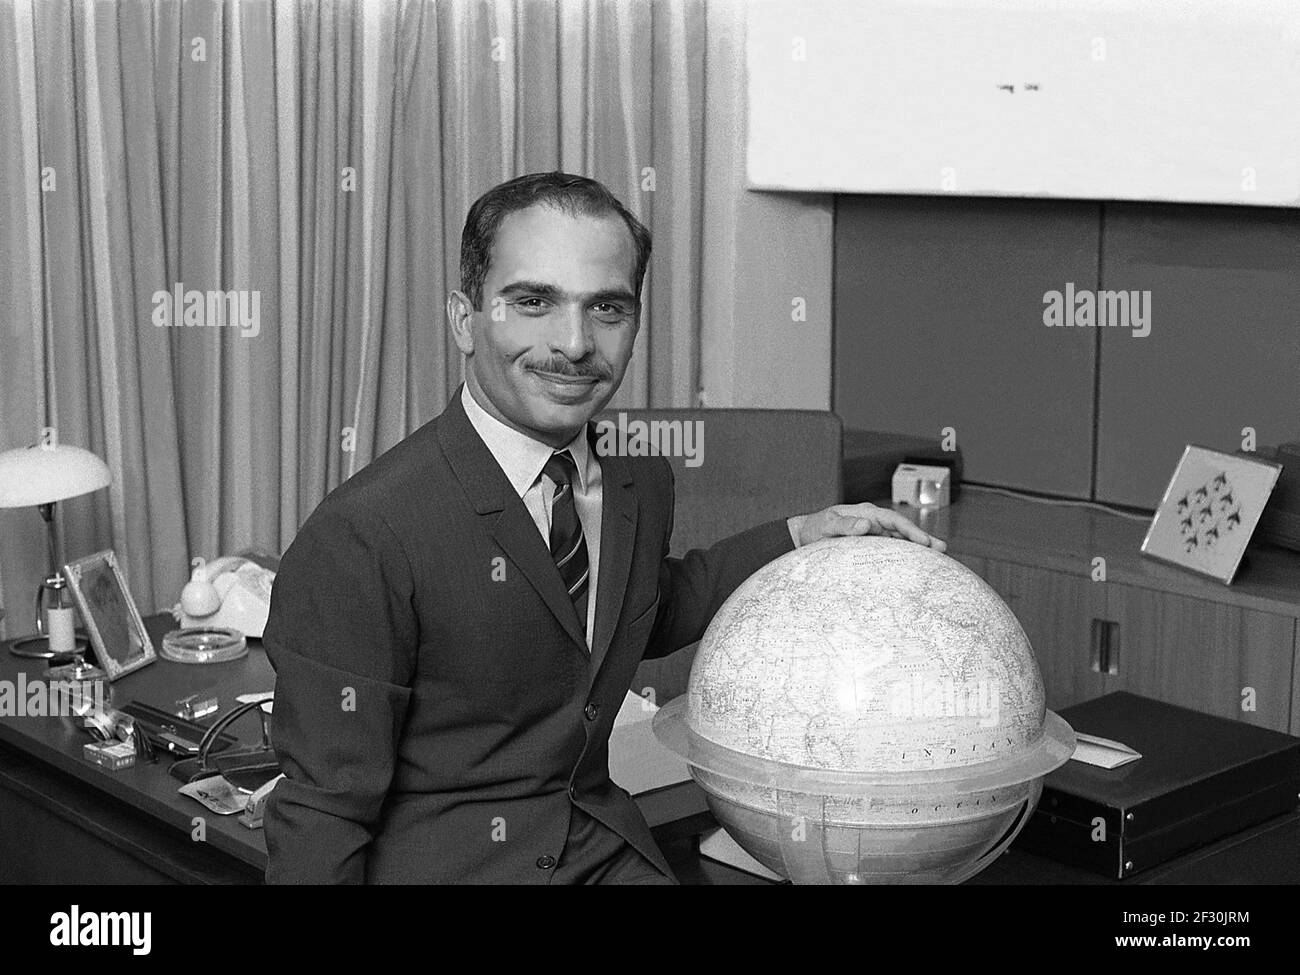 KING HUSSEIN of Jordan at office with a glob Stock Photo